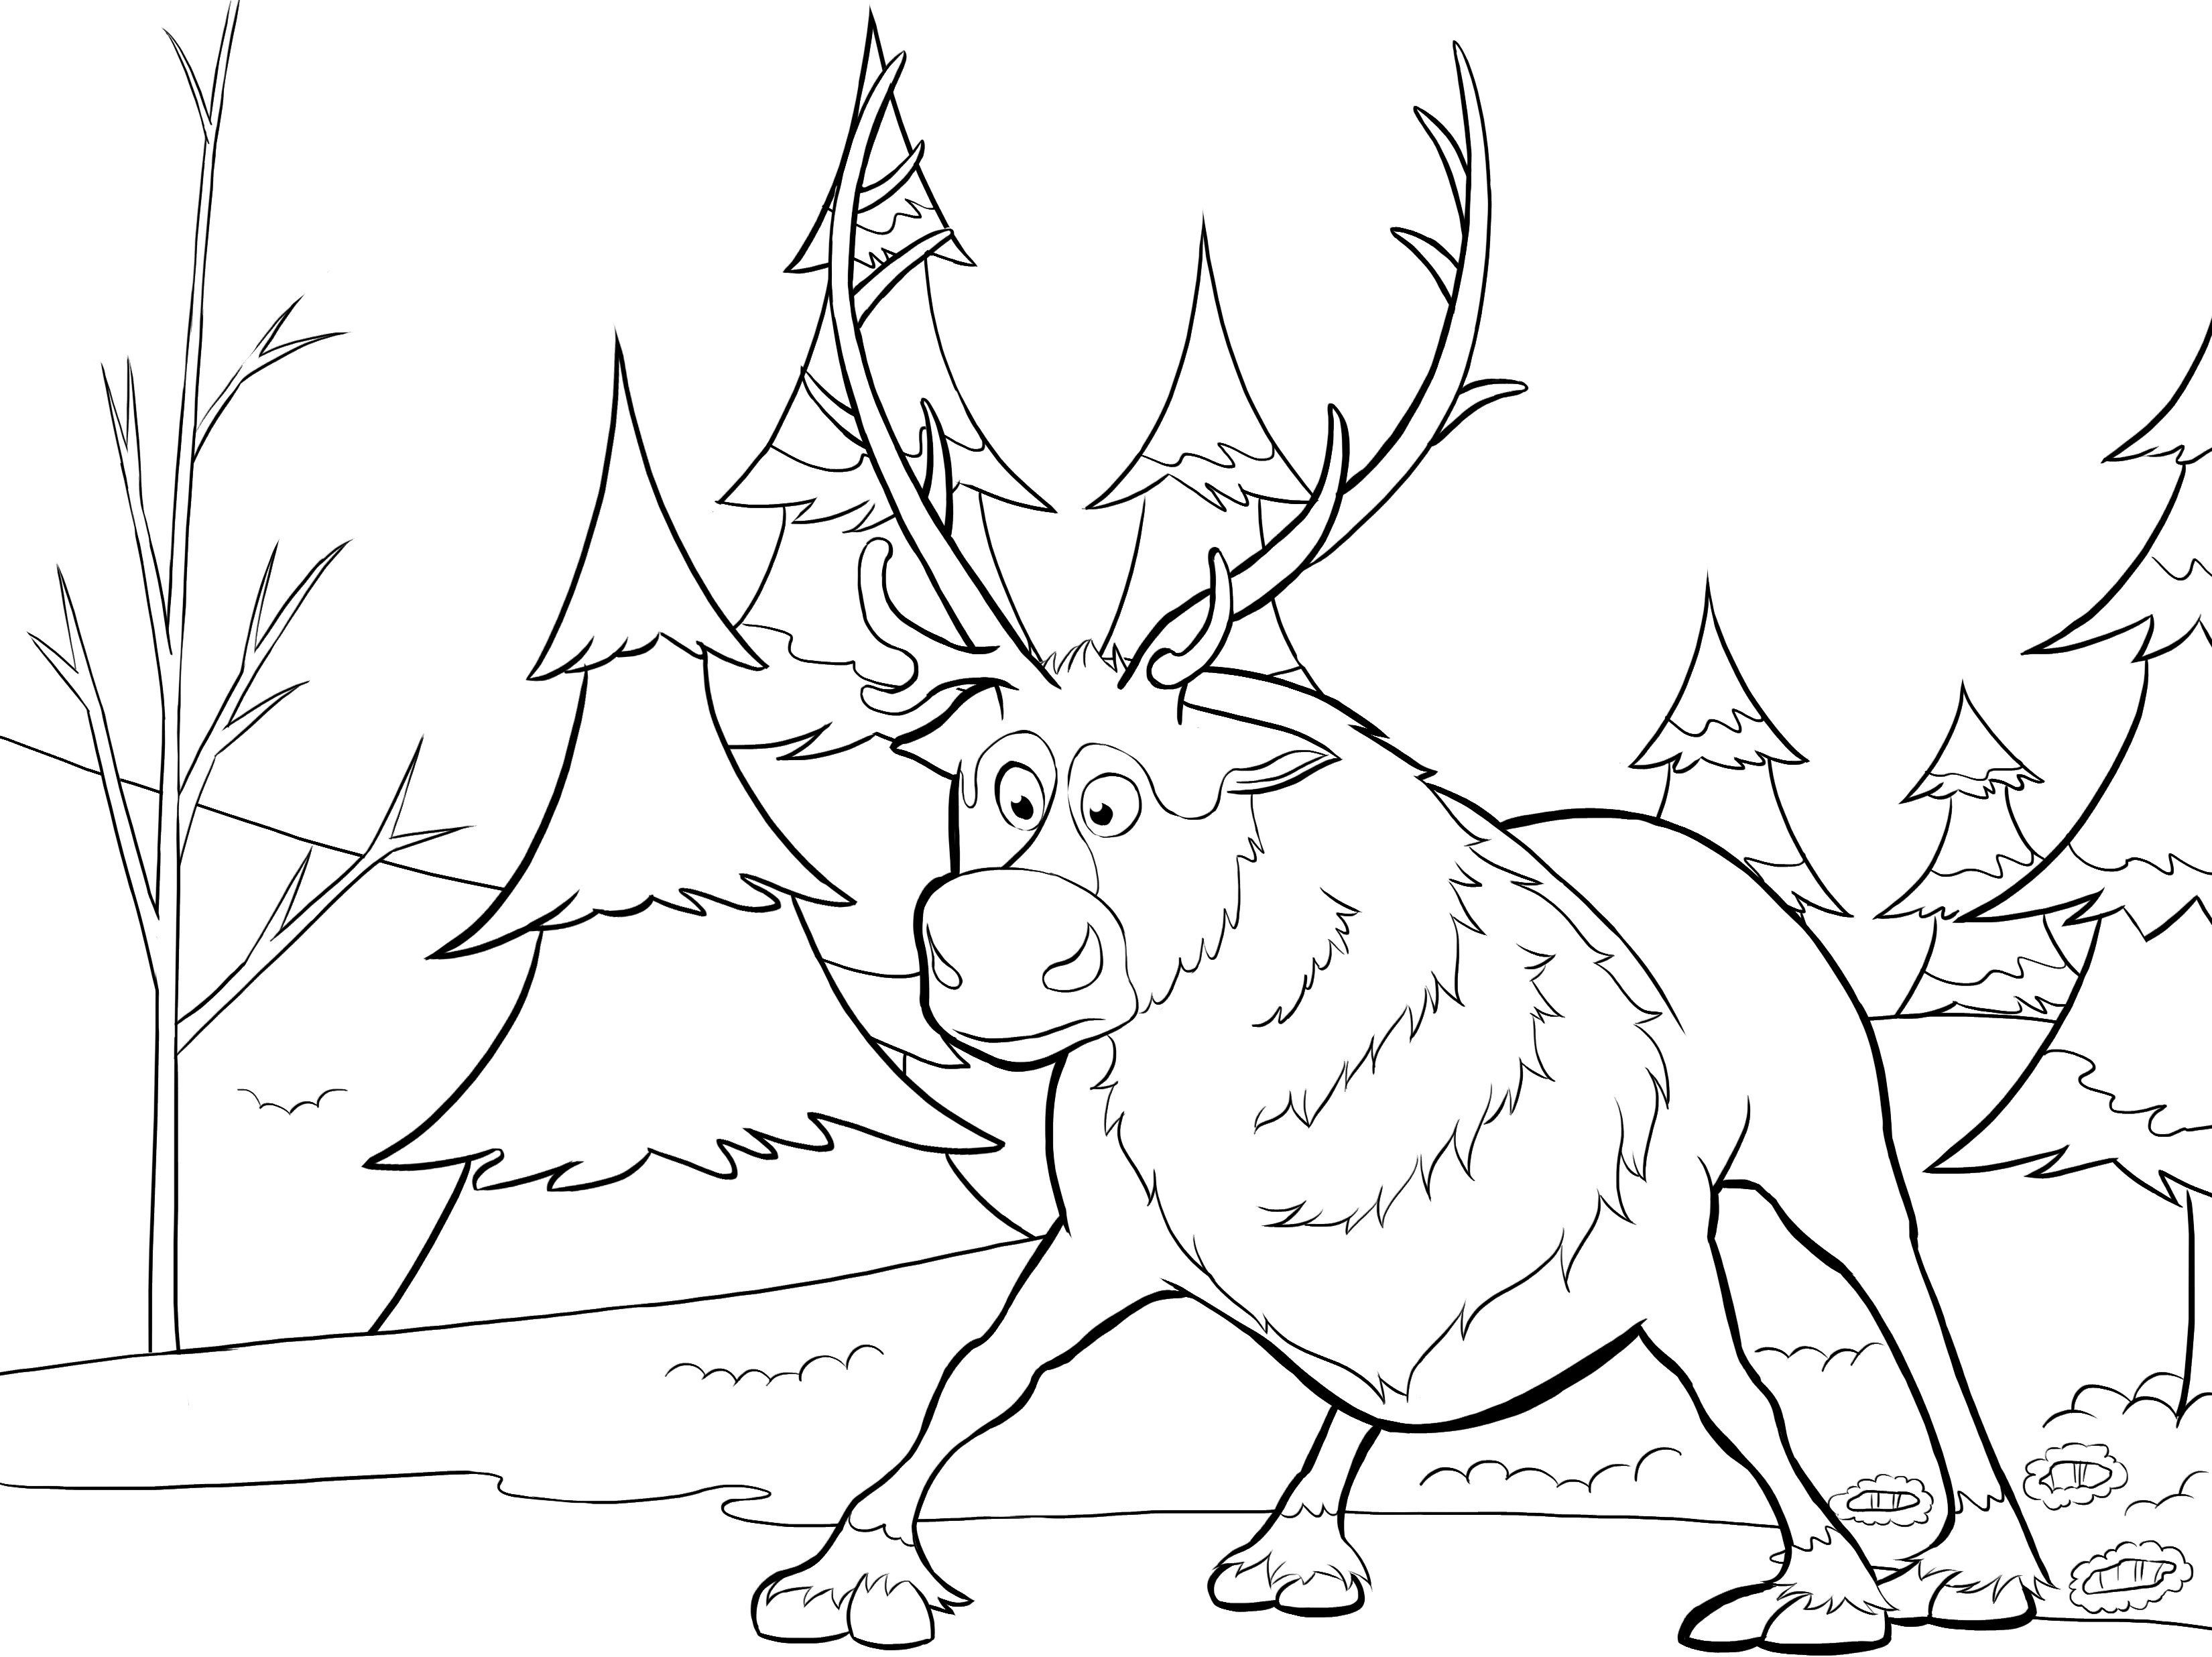 Sven Free Coloring Page | Frozen coloring, Frozen coloring ...